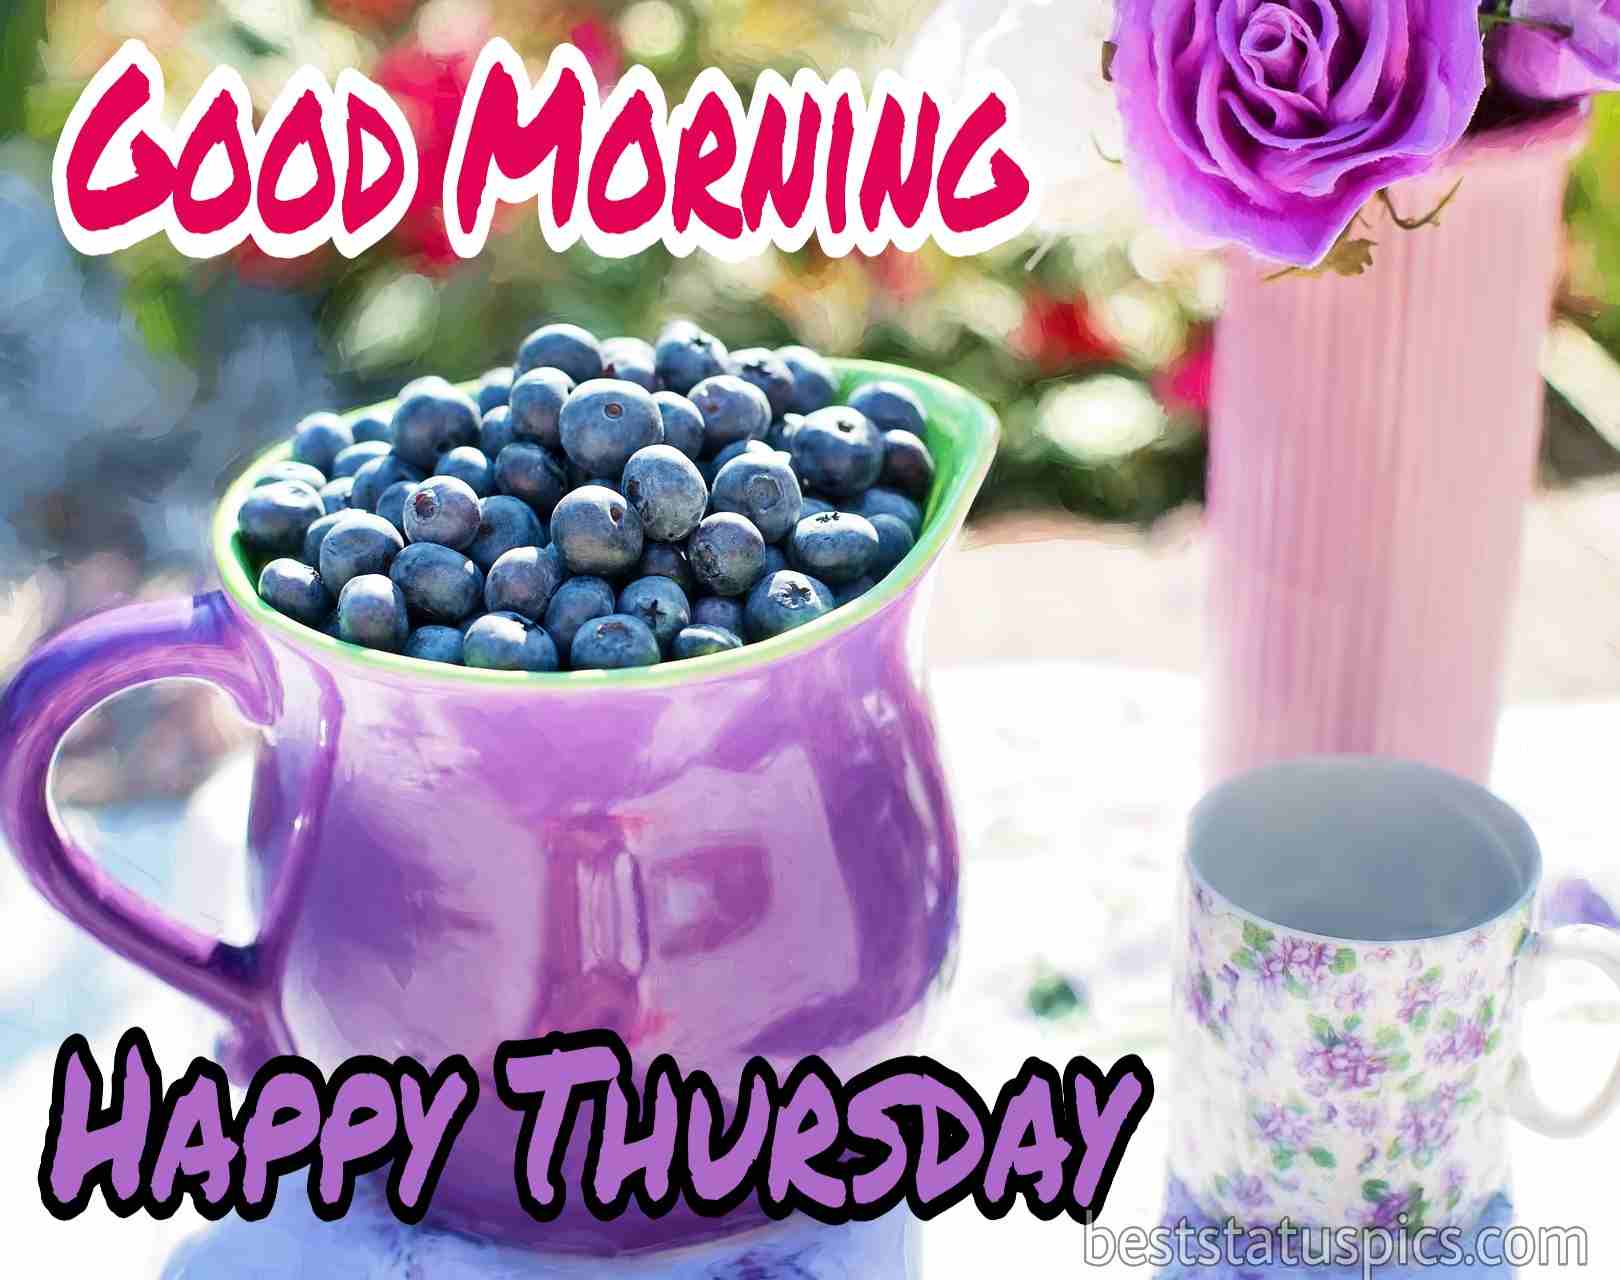 33+ Good Morning Happy Thursday Images, Wishes, Quotes - Best Status Pics